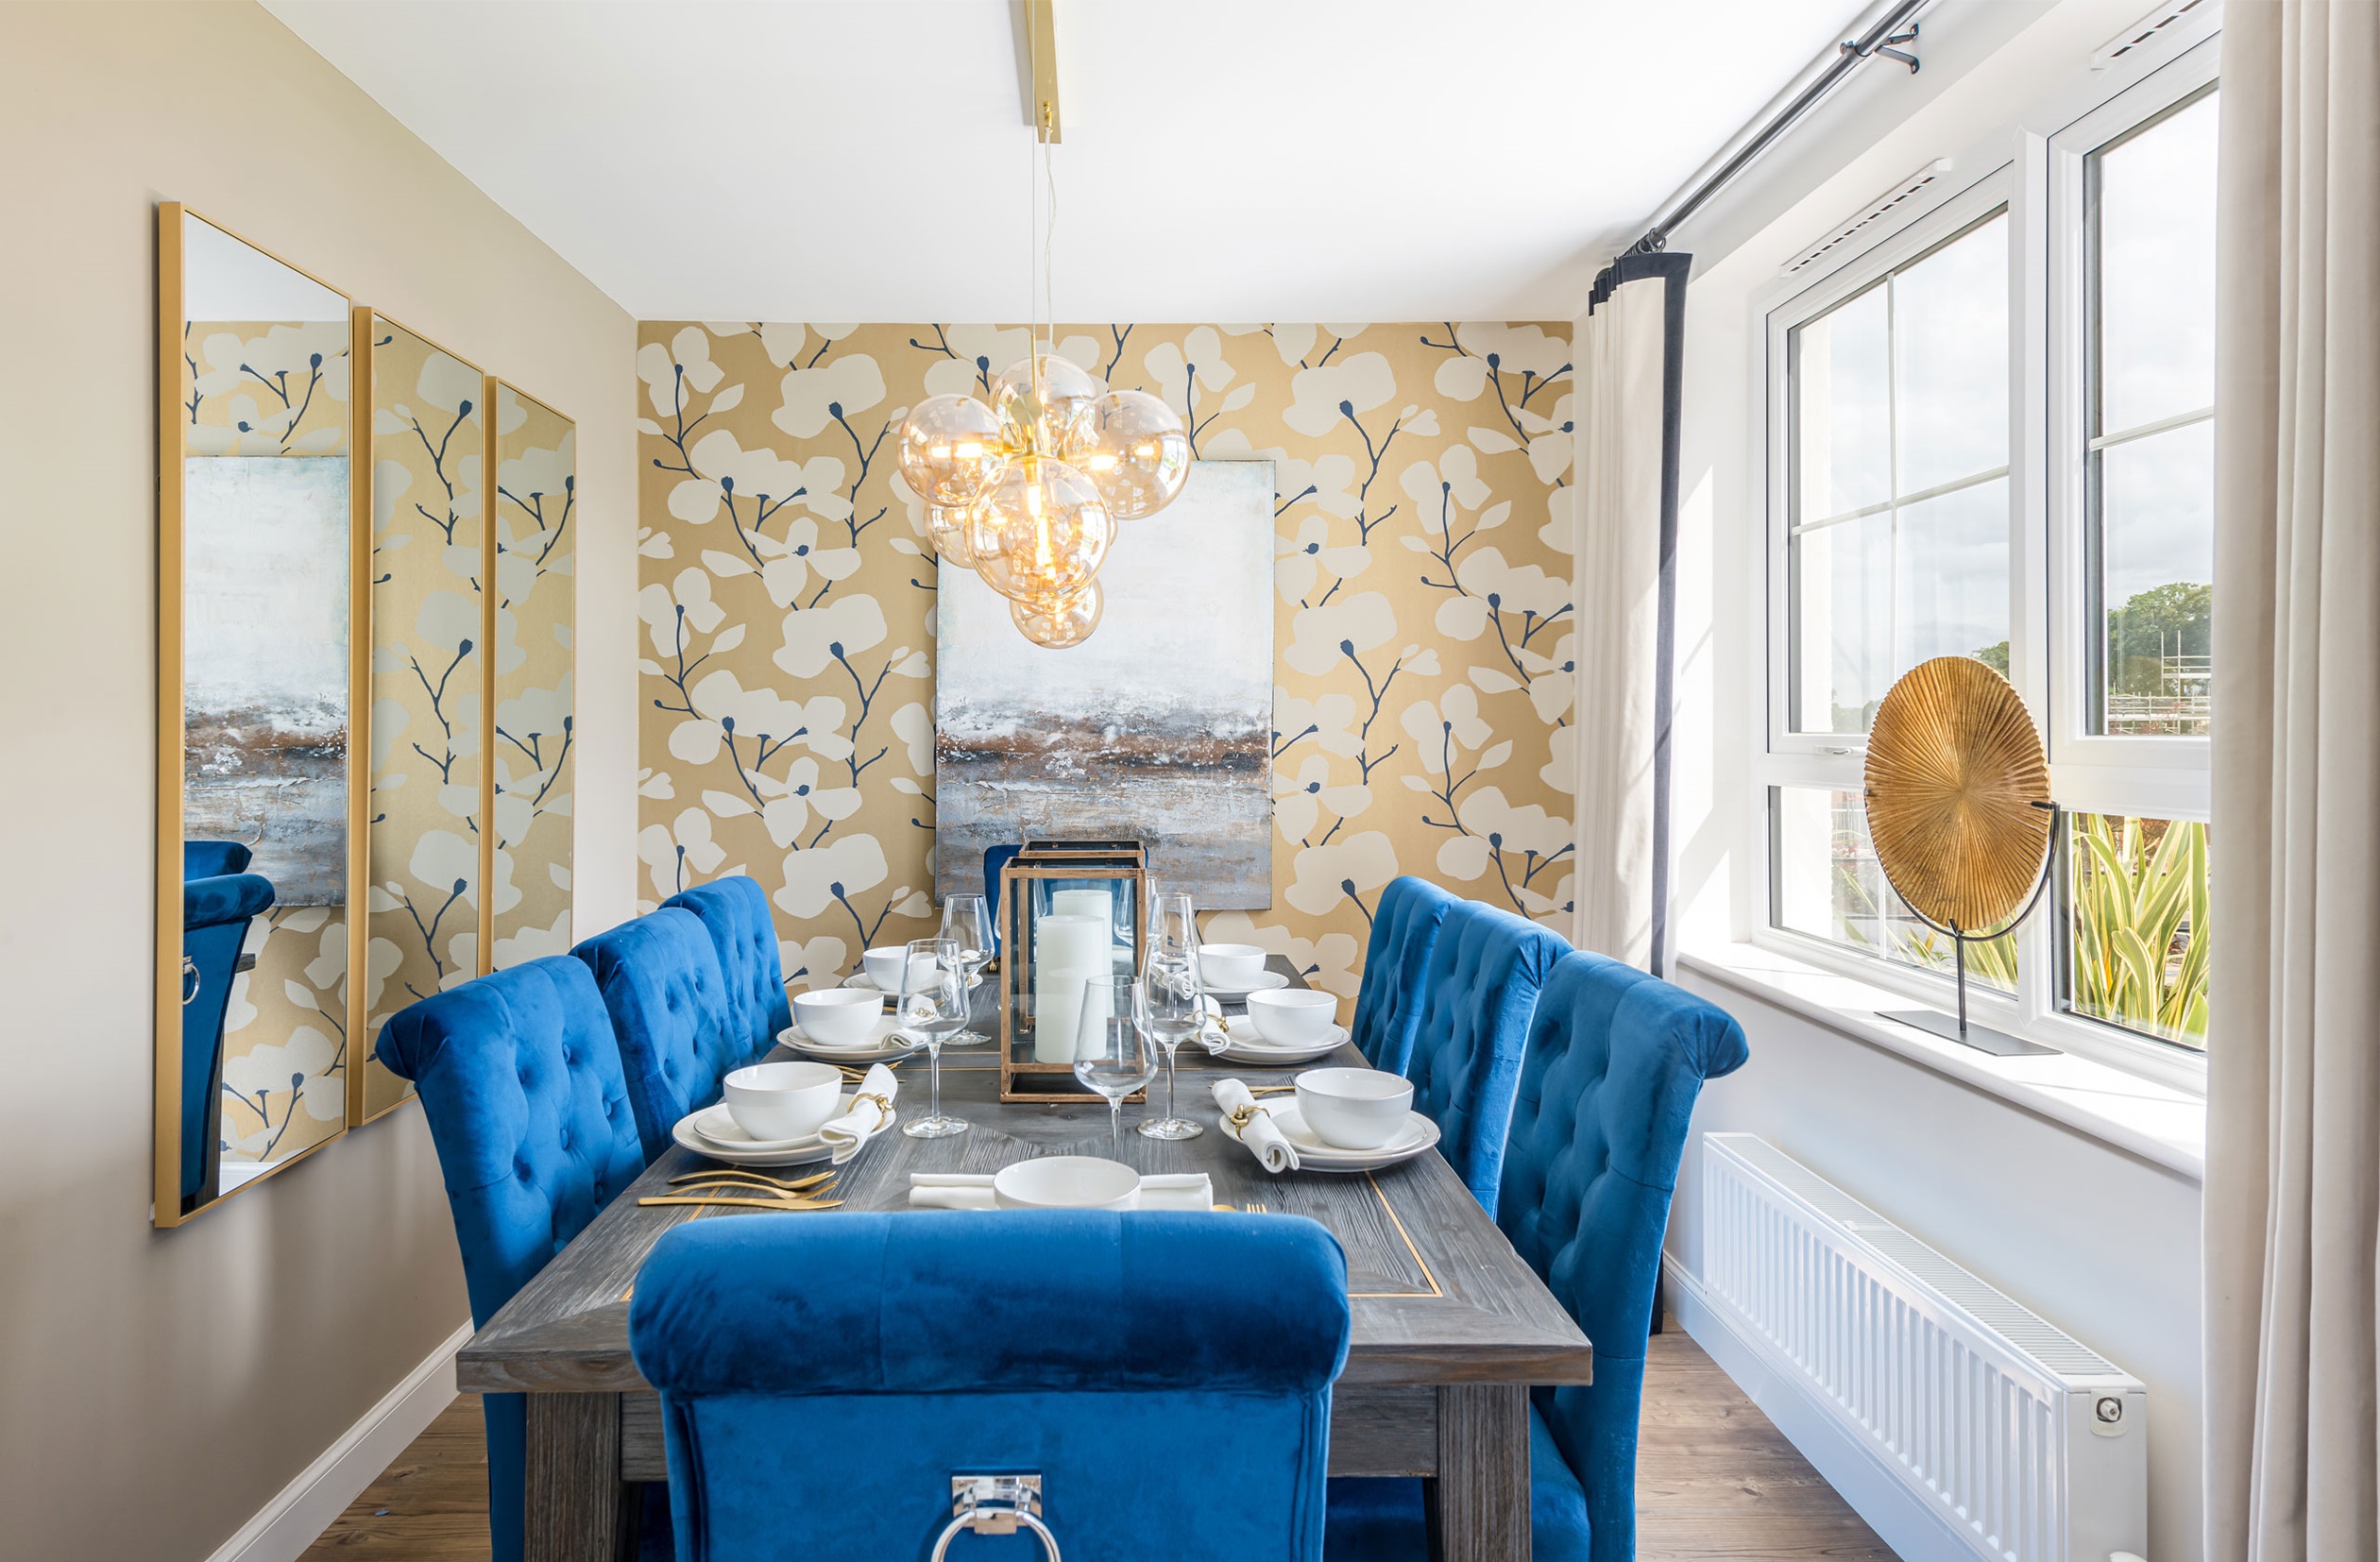 Property 3 of 10. Dining Room In Glenbervie Show Home